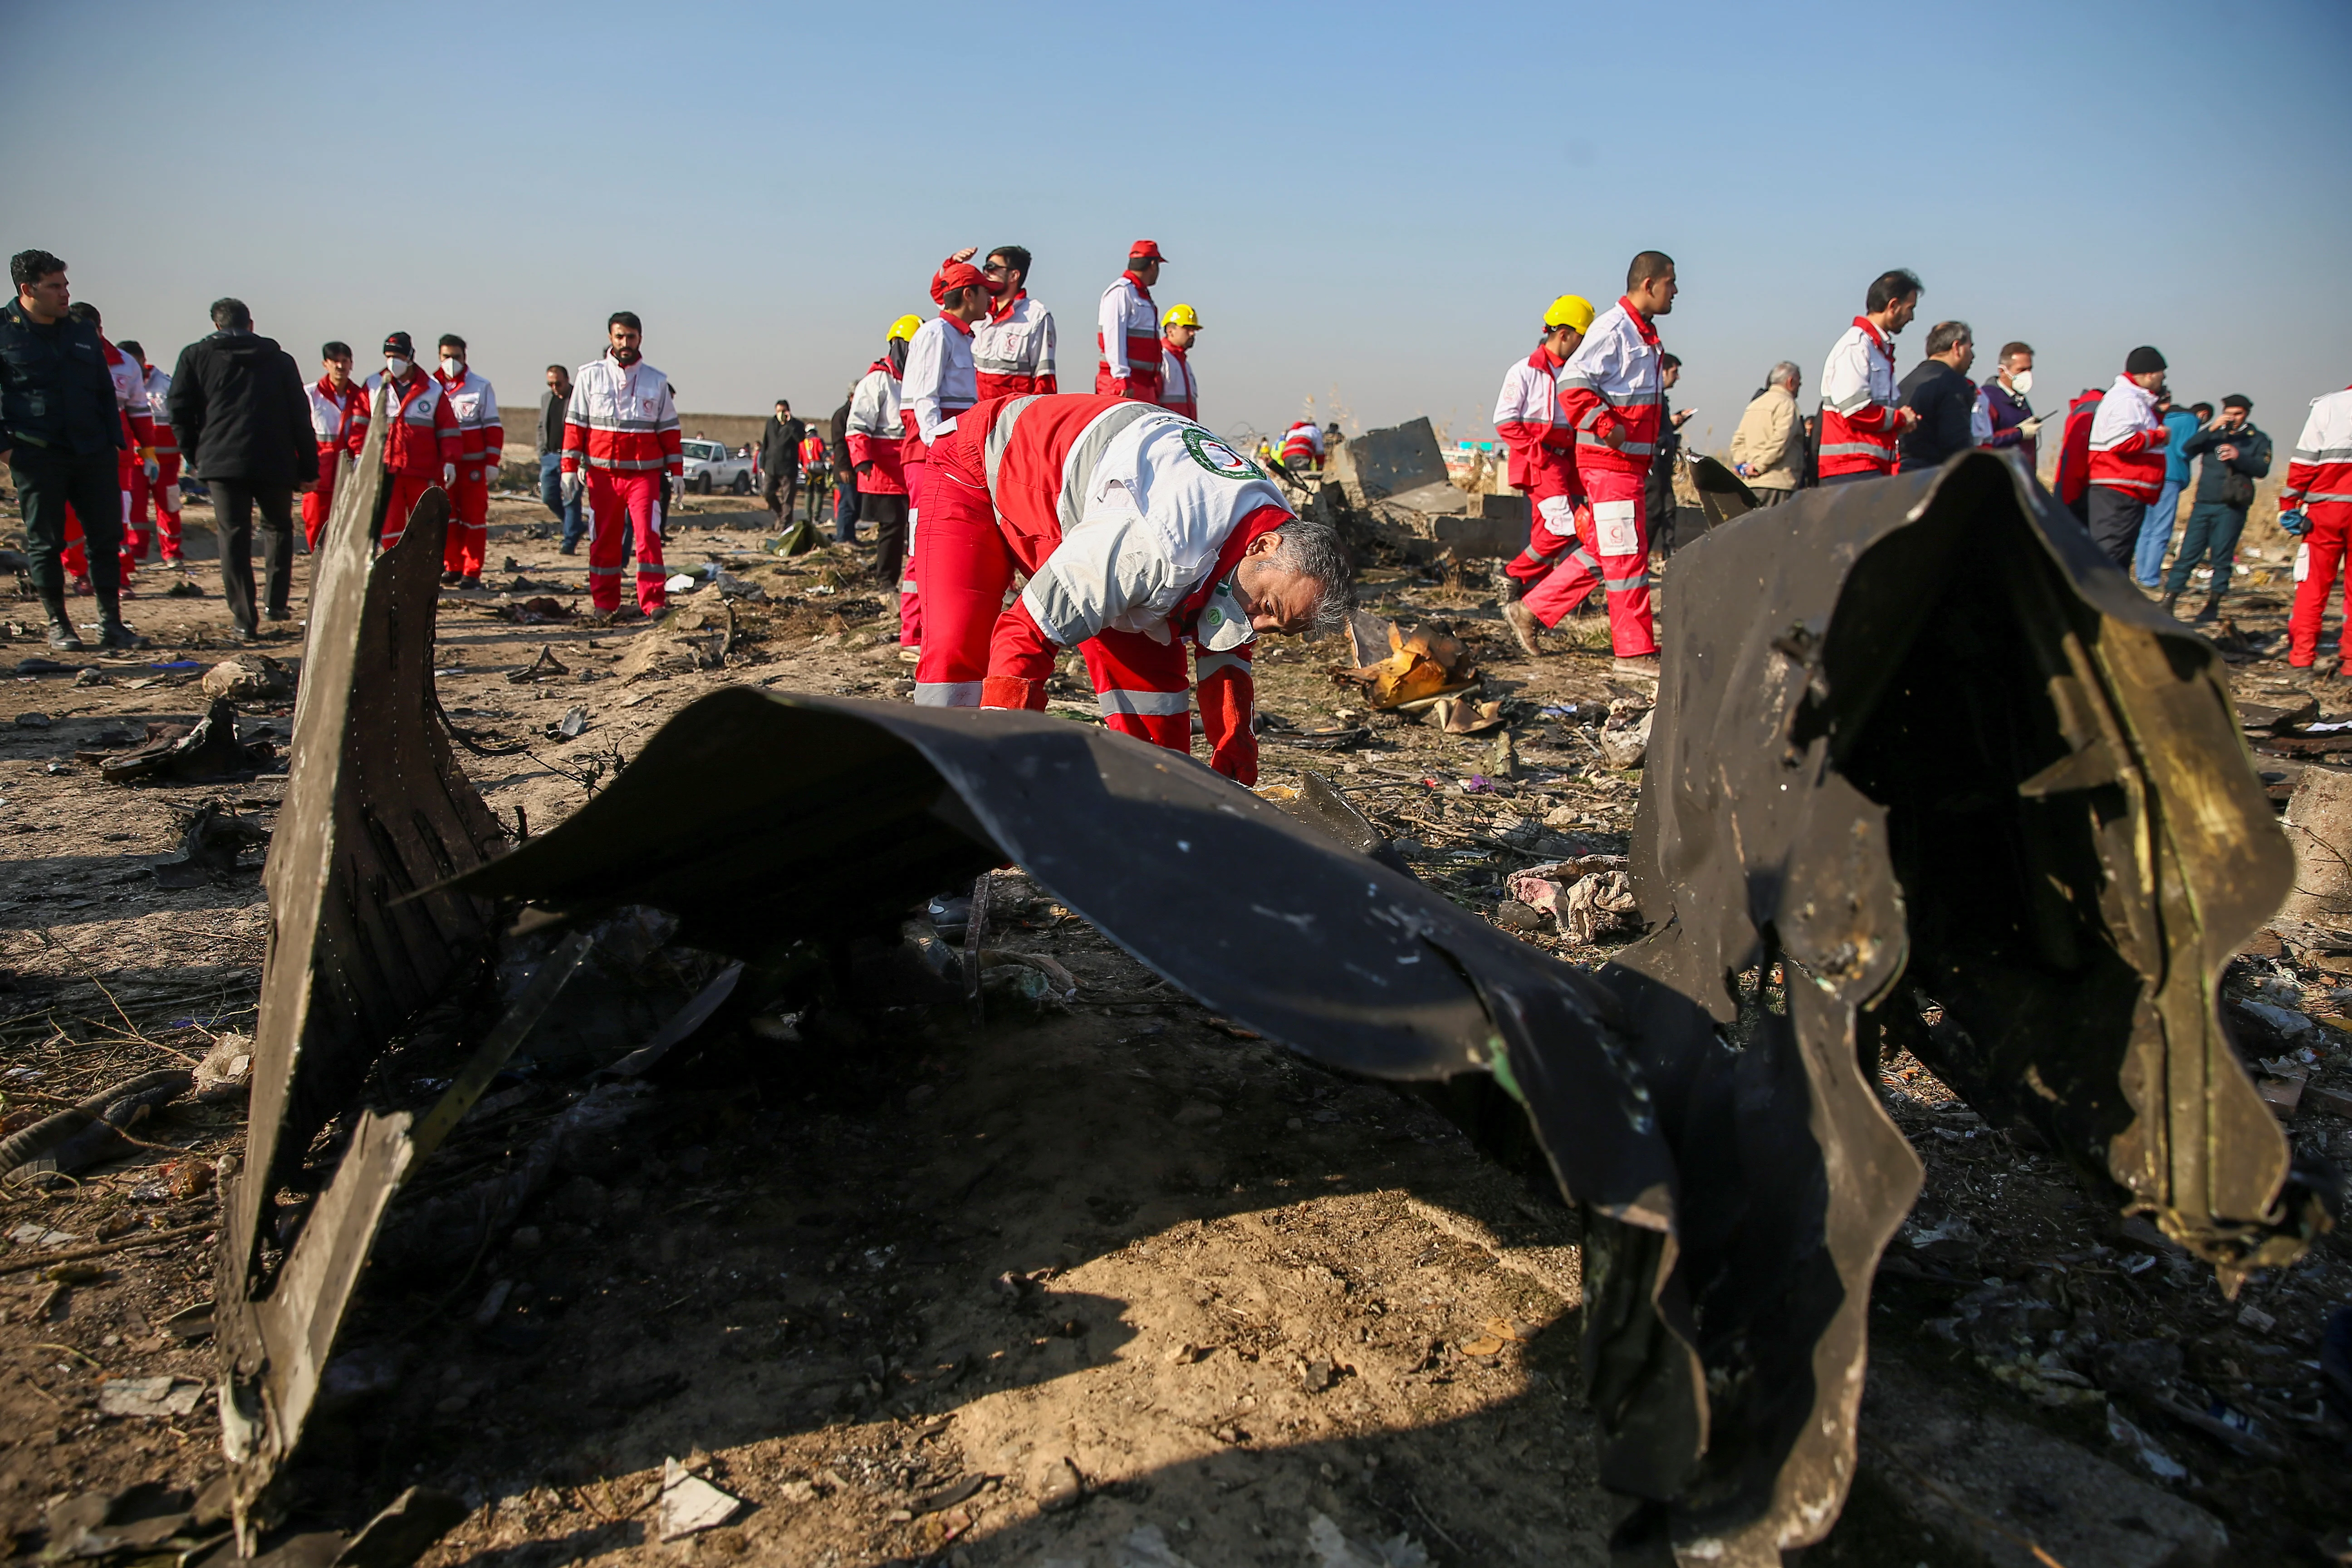 Red Crescent Workers Check The Debris From The Ukraine International Airlines Plane, That Crashed After Take Off From Iran's Imam Khomeini Airport, On The Outskirts Of Tehran